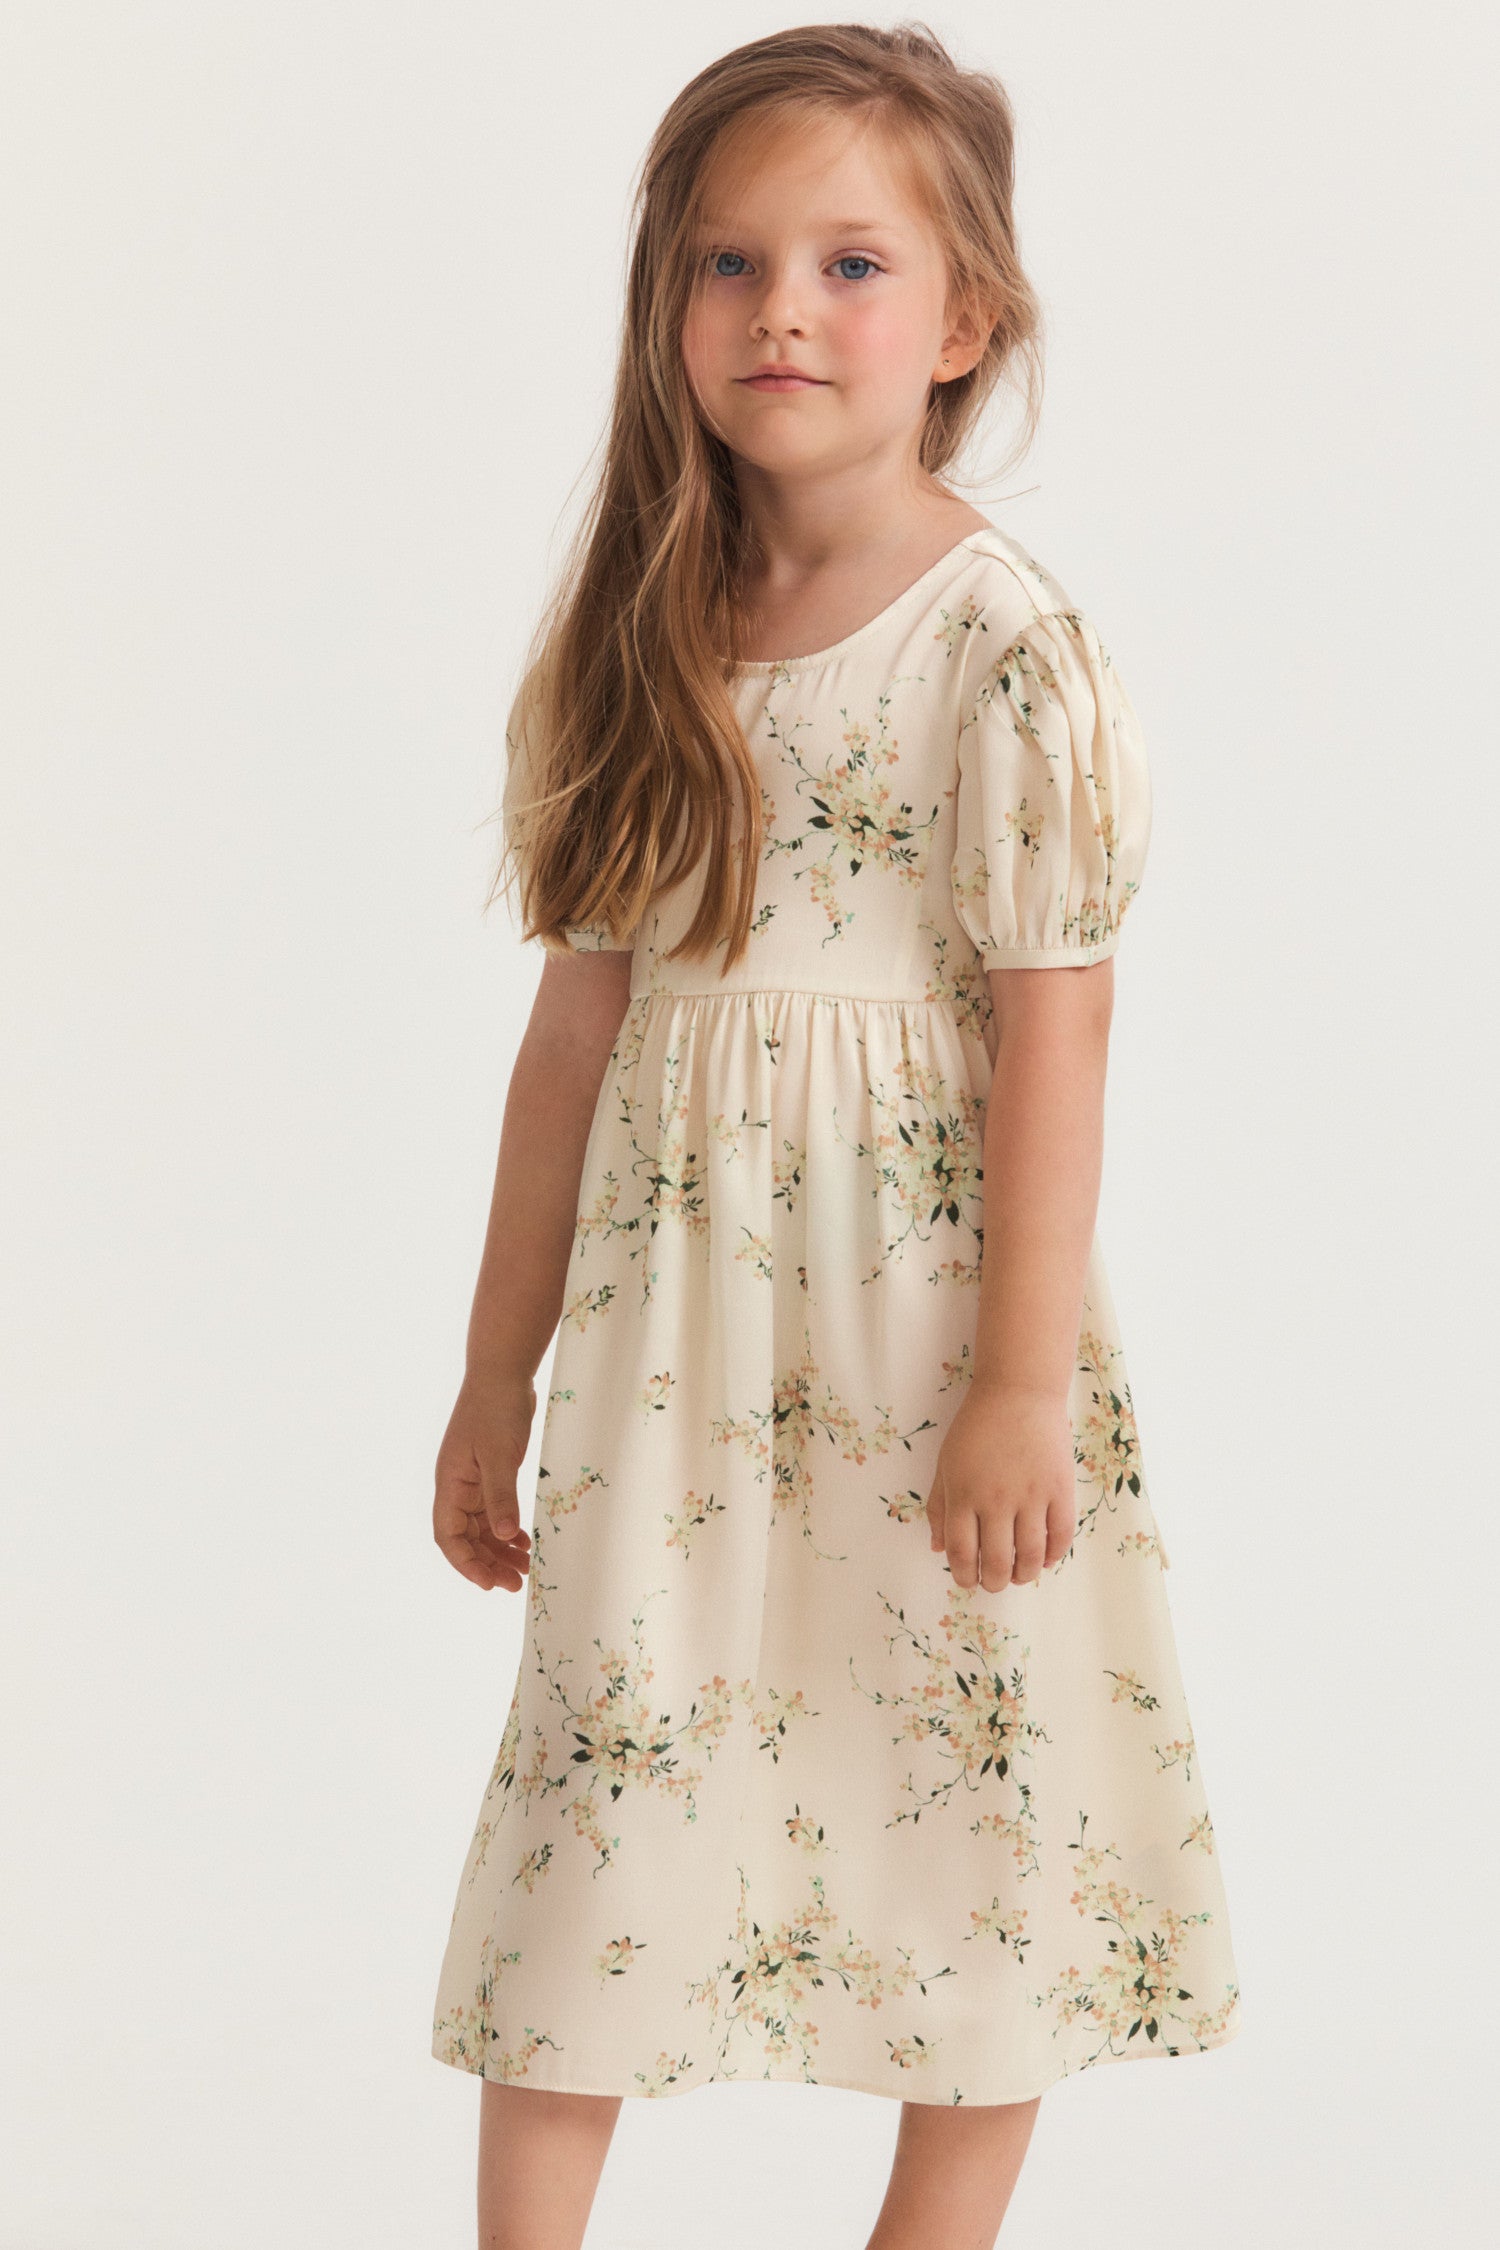 Girls canary yellow multi floral dress with cap sleeves